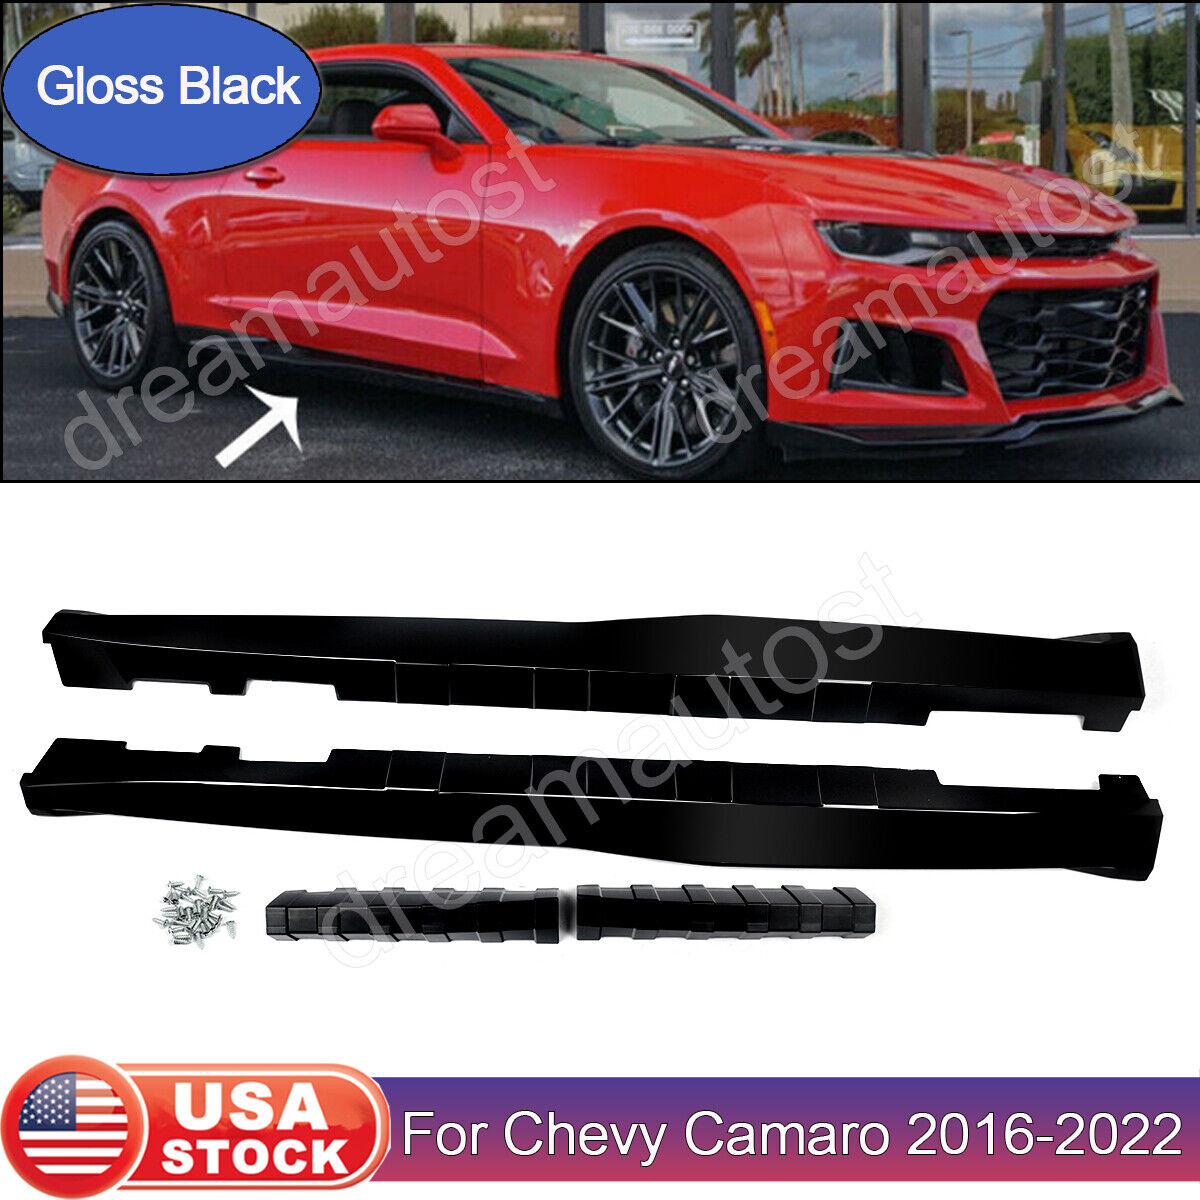 ZL1 Style Side Skirts Panel Extension Gloss Black For 16-22 Chevy Camaro RS & SS